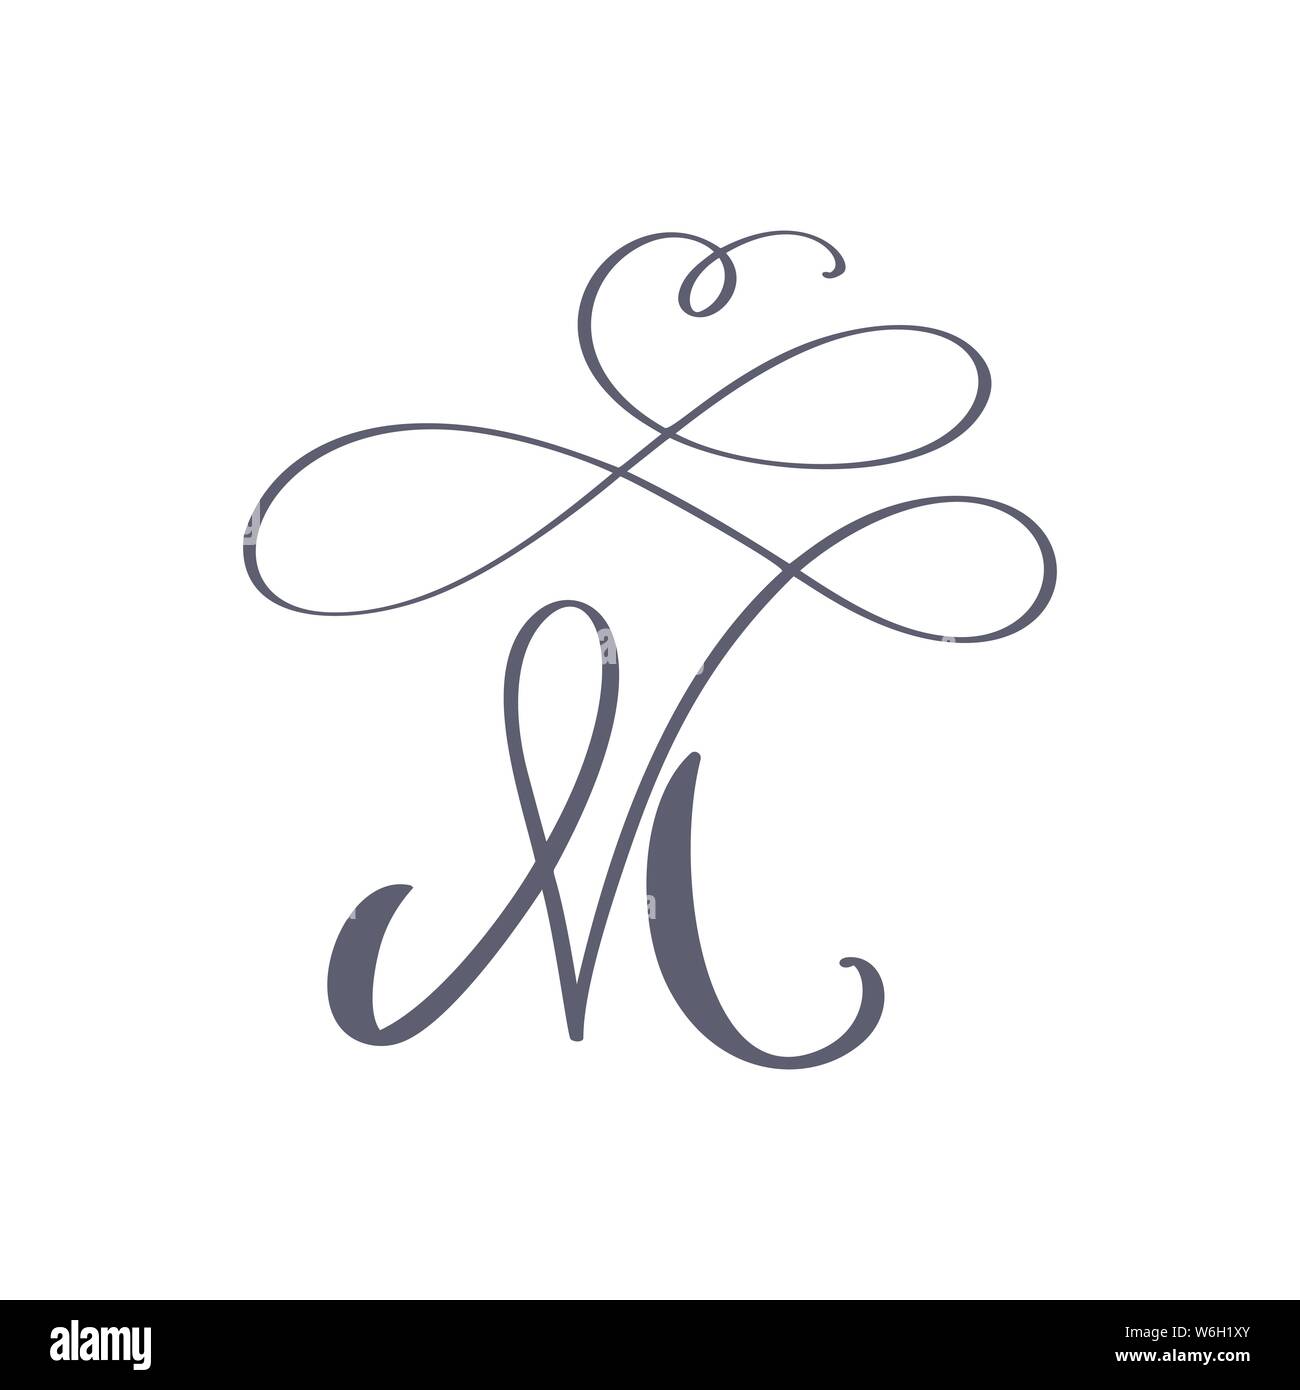 Vector Hand Drawn calligraphic floral M monogram or logo. Uppercase Hand Lettering Letter M with swirls and curl. Wedding Floral Design Stock Vector